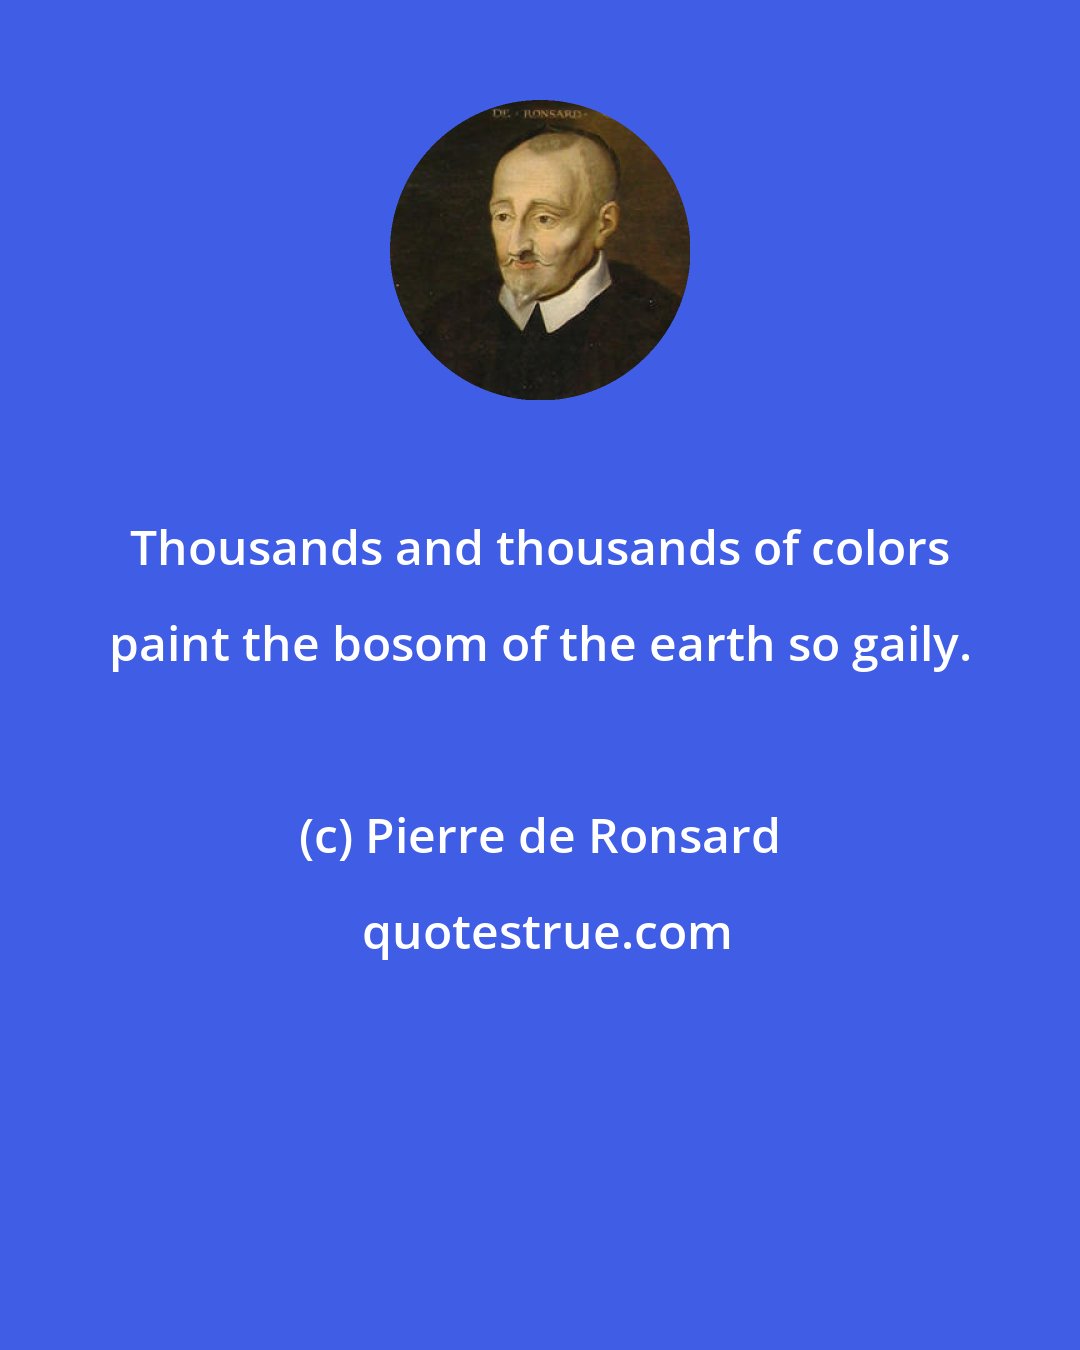 Pierre de Ronsard: Thousands and thousands of colors paint the bosom of the earth so gaily.